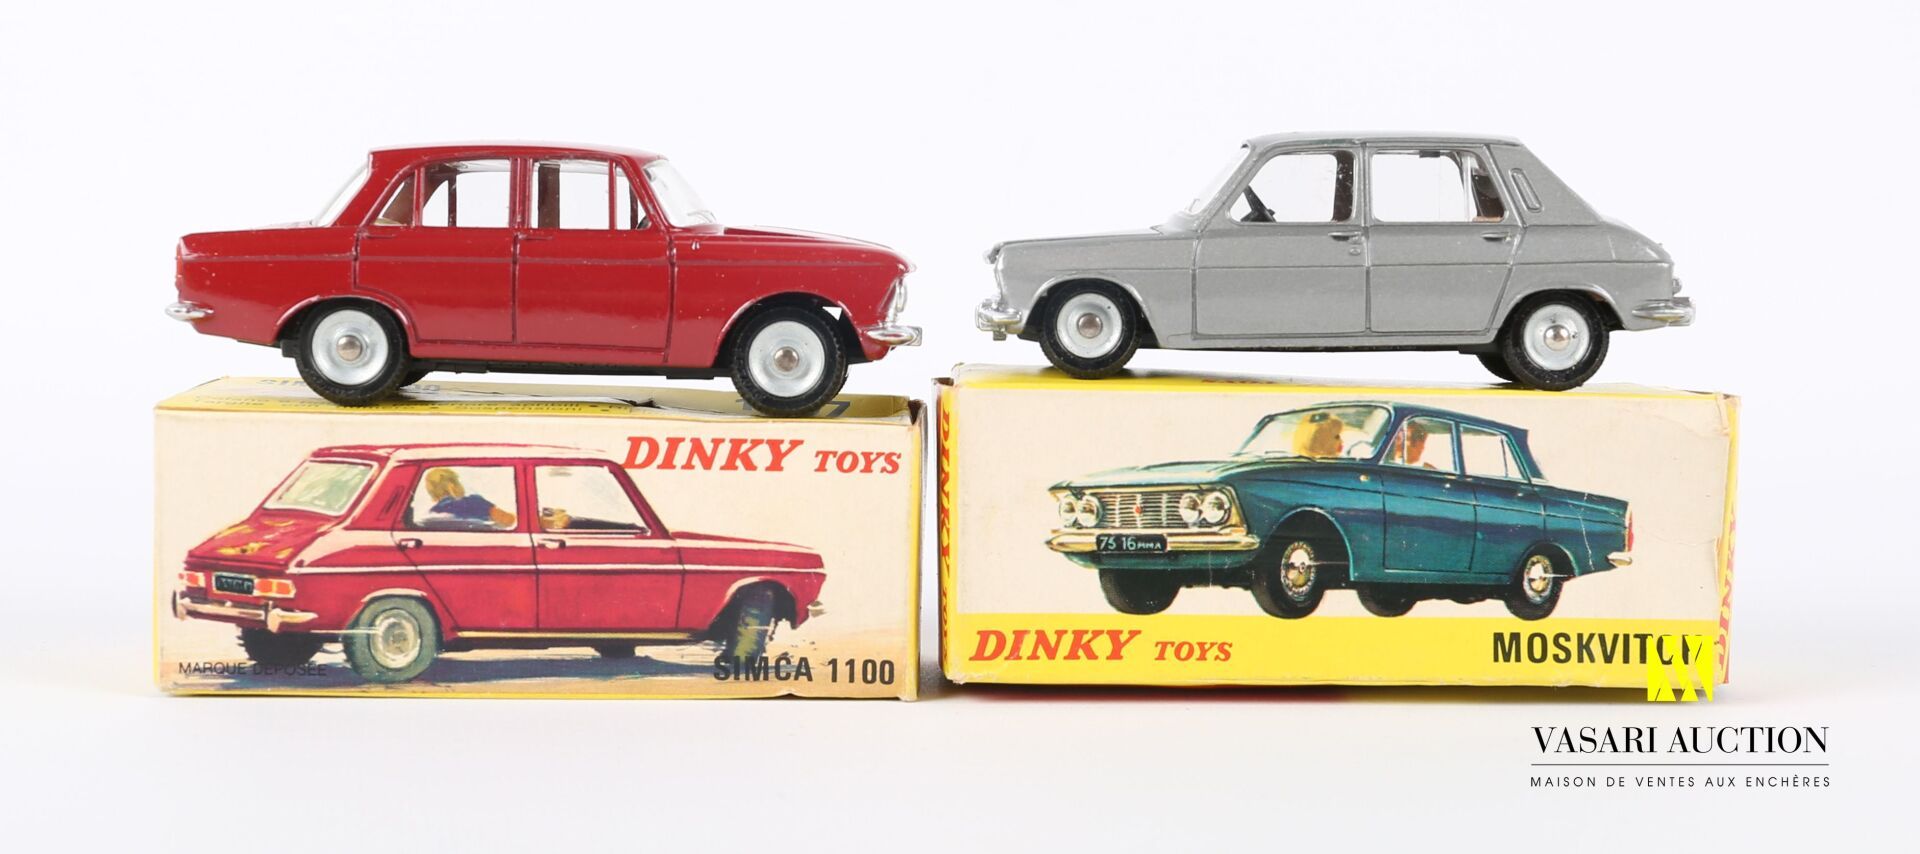 Null DINKY TOYS (FR)

Lot of two vehicles : Simca 1100 Ref 1407 - Moskvitch Ref &hellip;